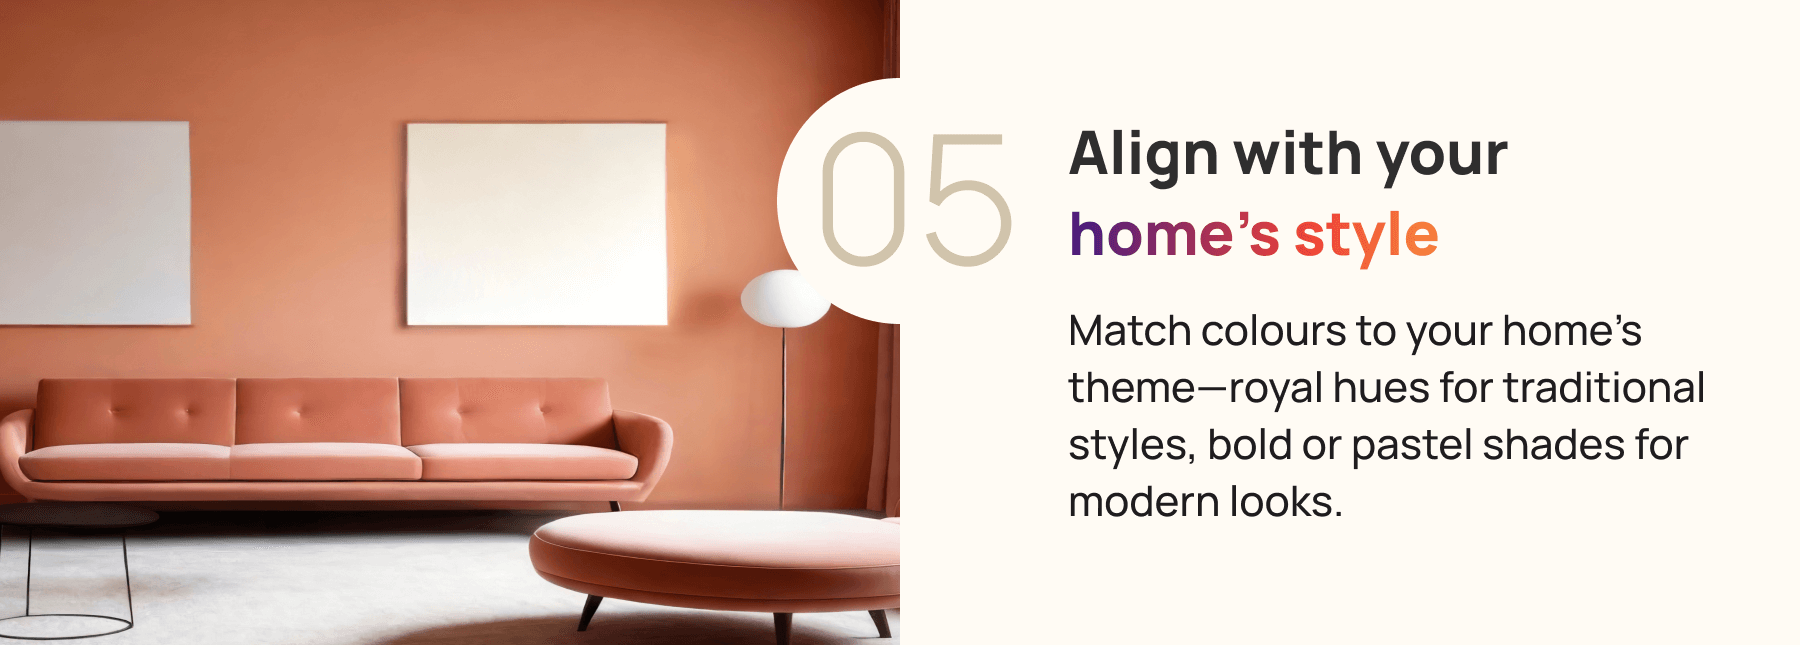 Align with your homes style